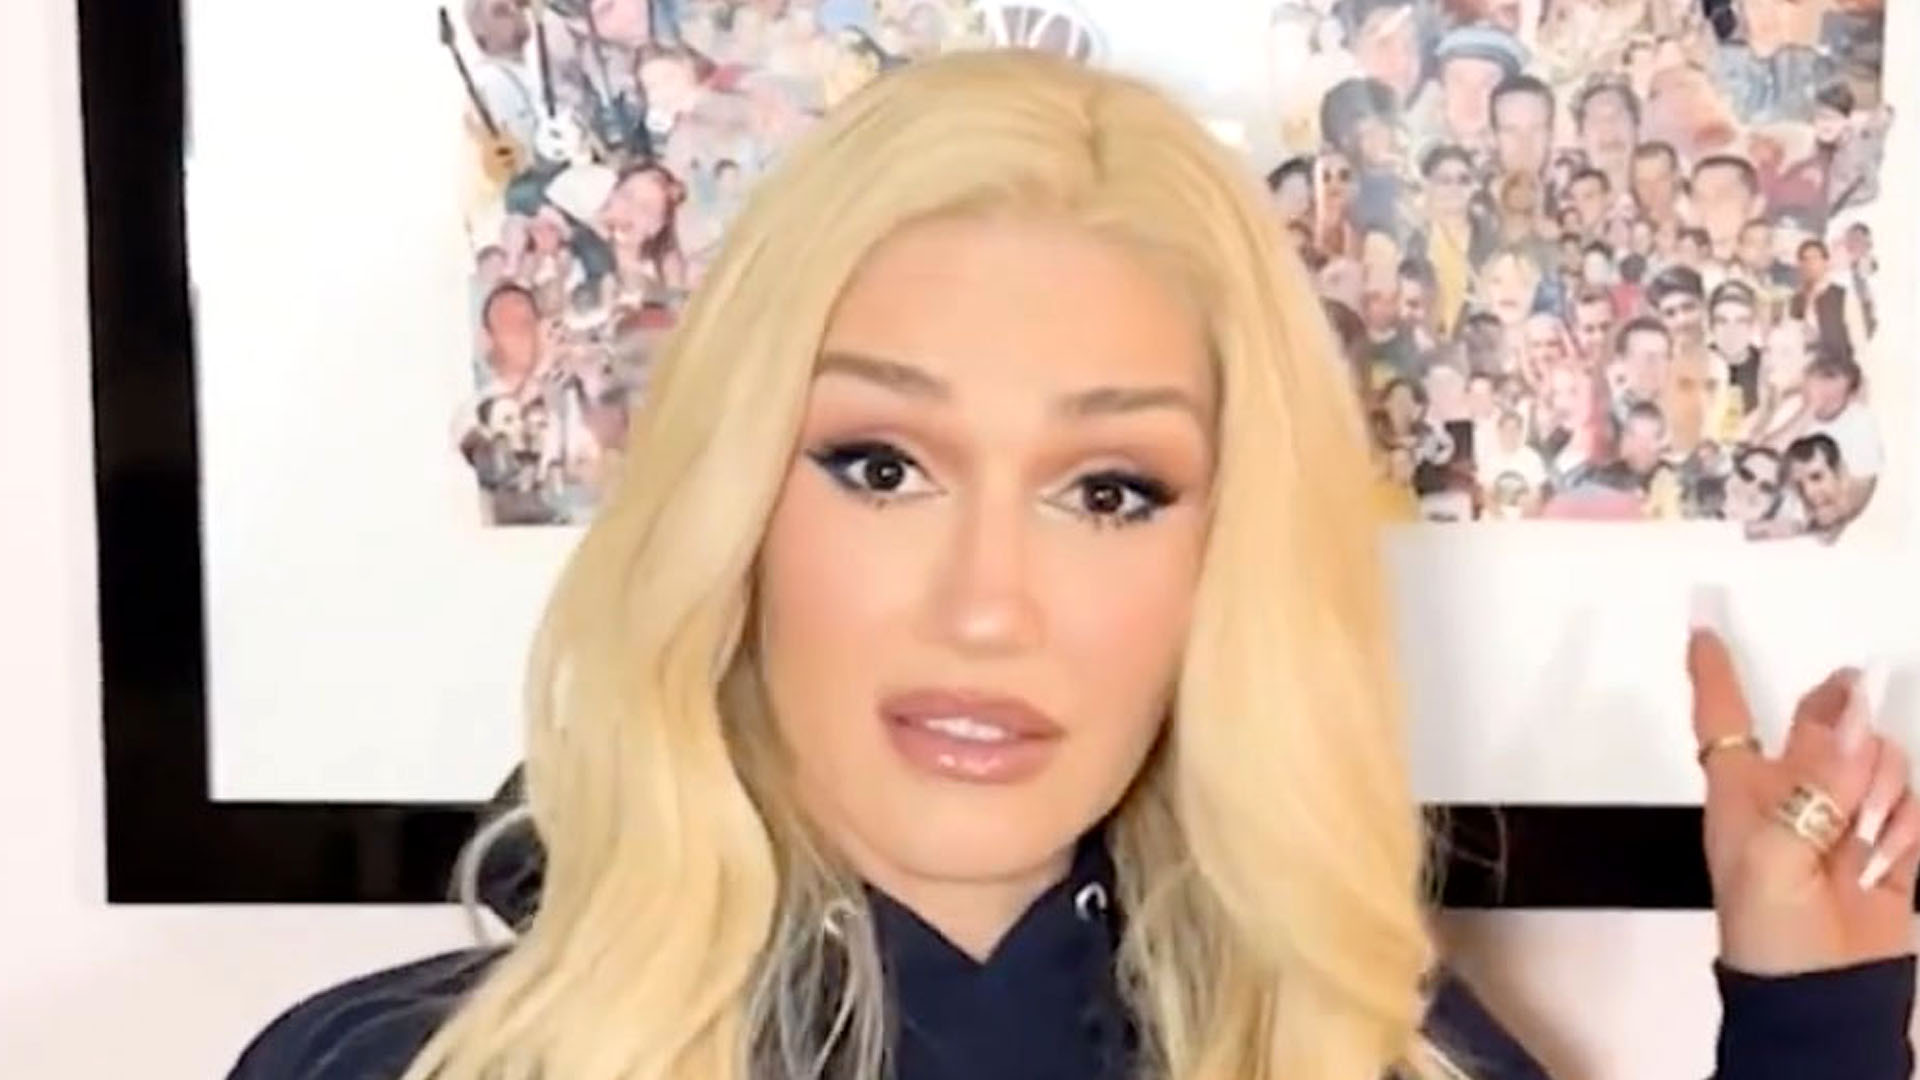 Fans accuse Gwen Stefani of ‘changing’ Blake Shelton in ‘forced’ video as they long for his ‘old’ self” – SEO Title: “Gwen Stefani Accused of Changing Blake Shelton in Forced Video – Fans Long for Old Self